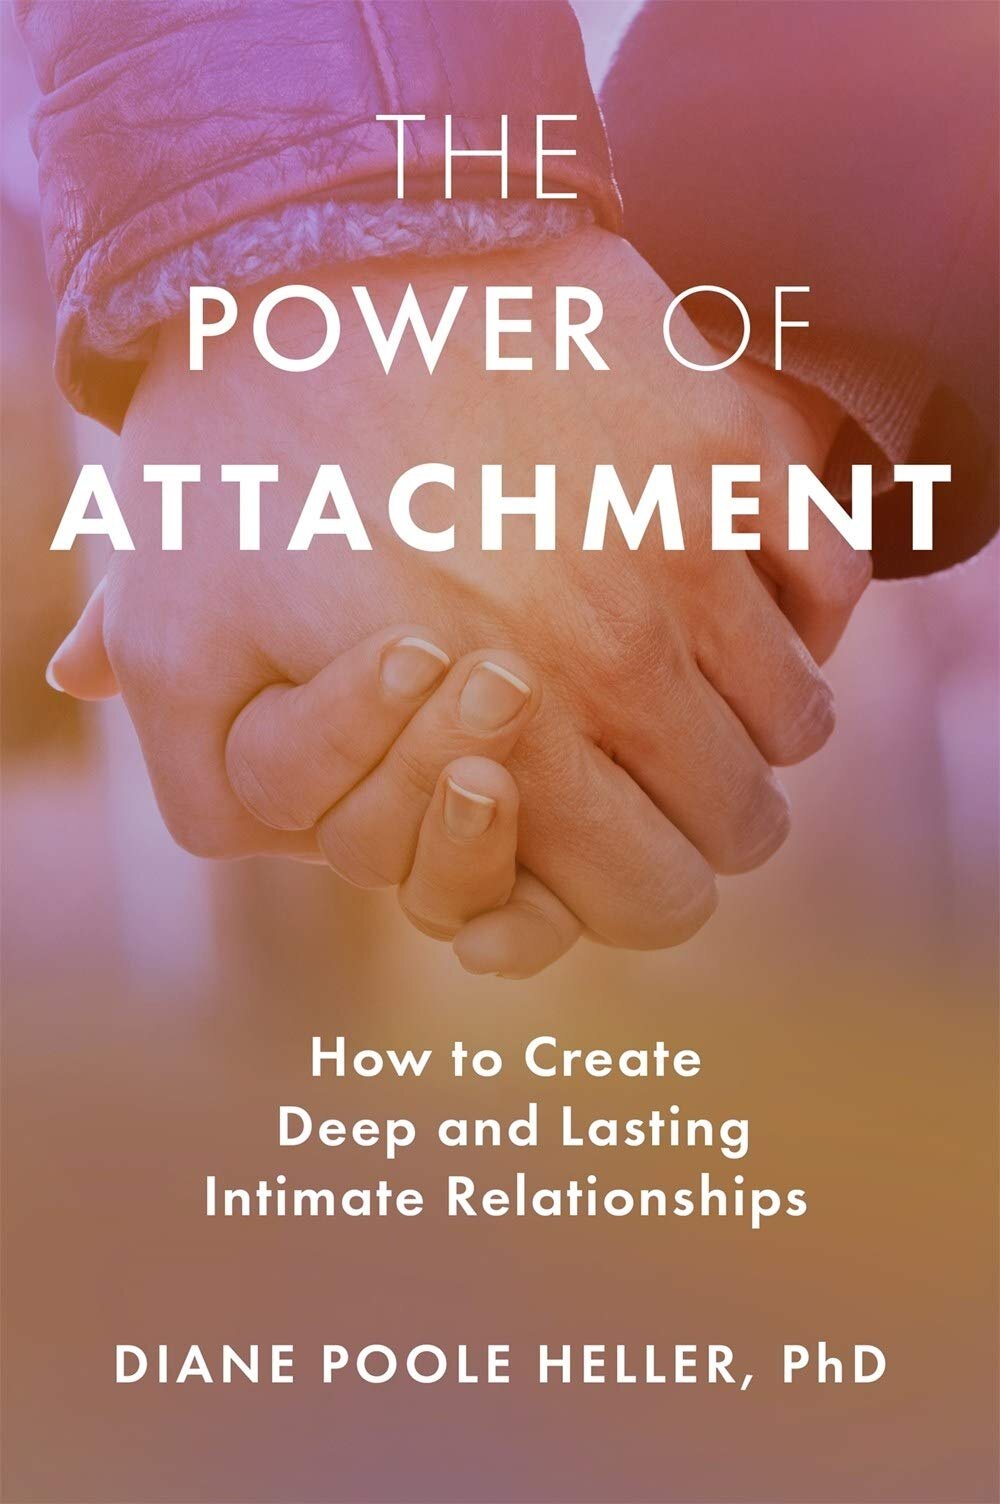 The Power of Attachment by Diane Poole Heller & Peter A. Levine.jpg